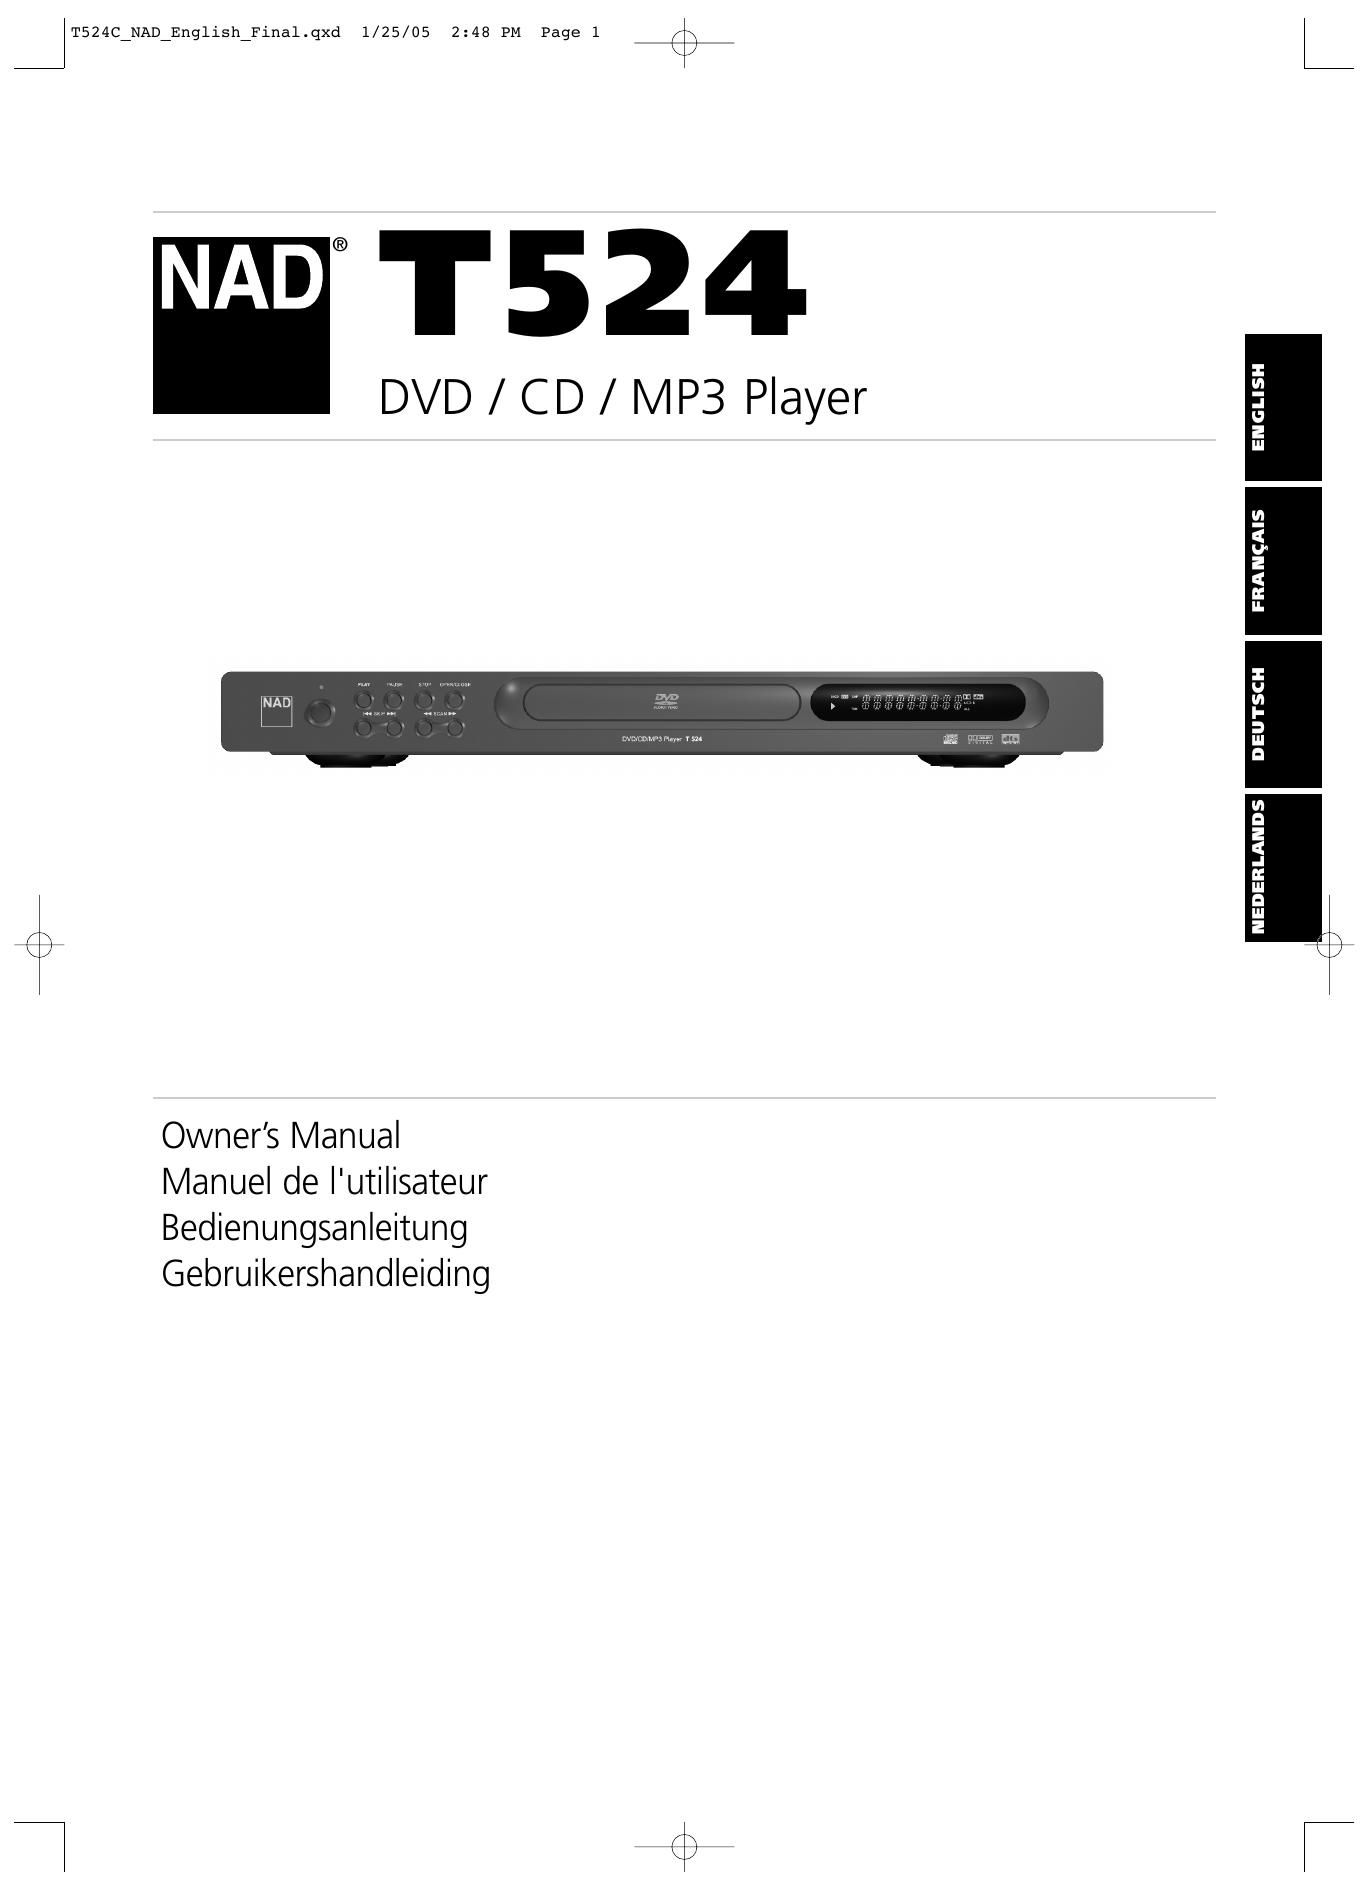 Nad T 524 Owners Manual